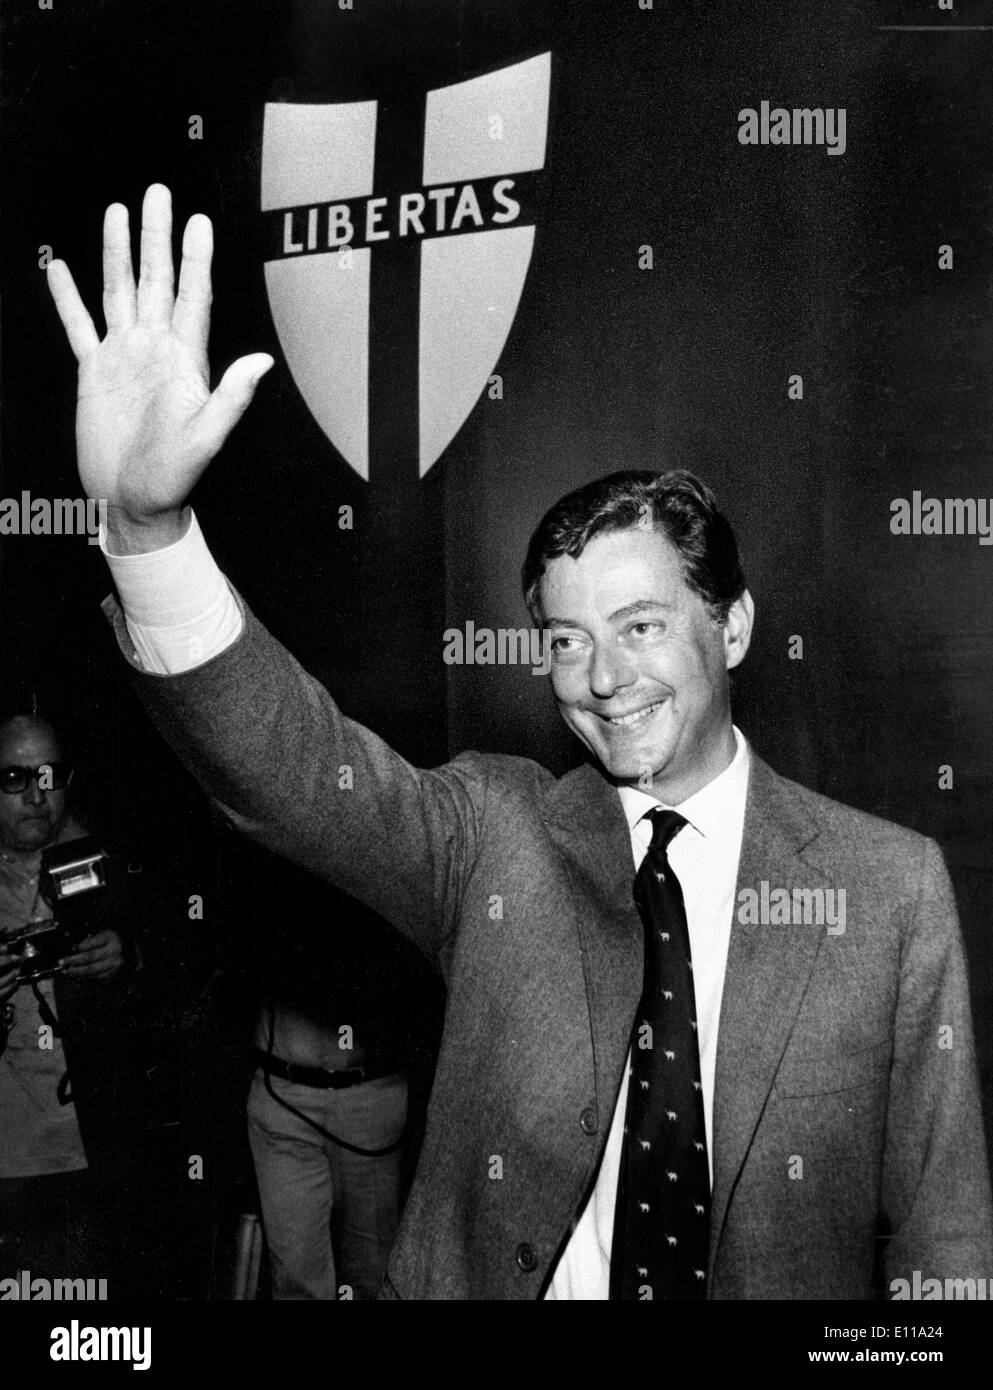 Jun 01, 1976; Turin, Italy; The businessman UMBERTO AGNELLI, the brother of Gianni, the greatest shareholders of the FIAT, the cars manufactoring in Turin, held his first rally in view of the next 20 june general election where he will take part as senator in the list of the D.C. (the Christian Democrat Party). The picture shows Agnelli during the rally. Stock Photo